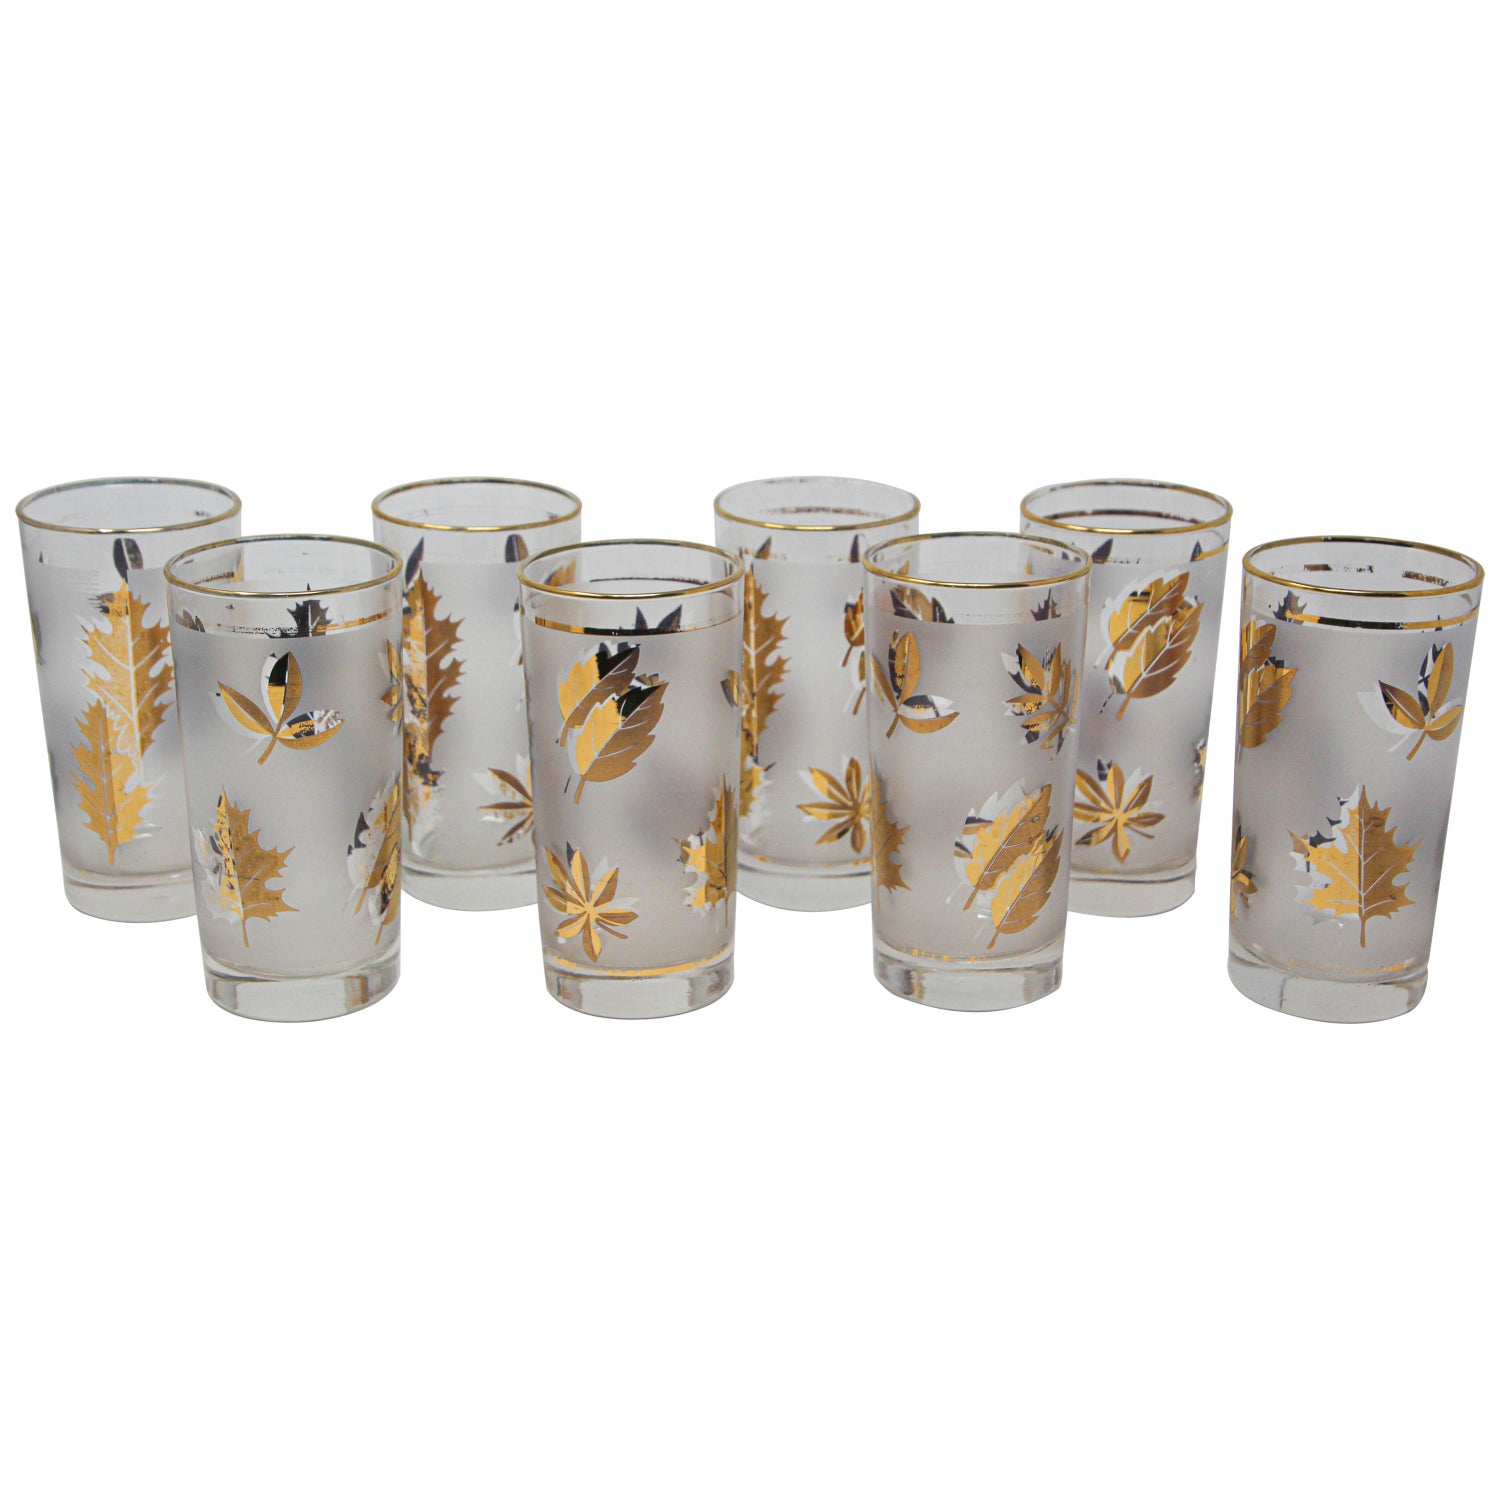 https://a.1stdibscdn.com/vintage-midcentury-libbey-set-of-eight-highball-frosted-and-gold-glasses-for-sale/1121189/f_225279621613455887494/22527962_master.jpg?width=1500